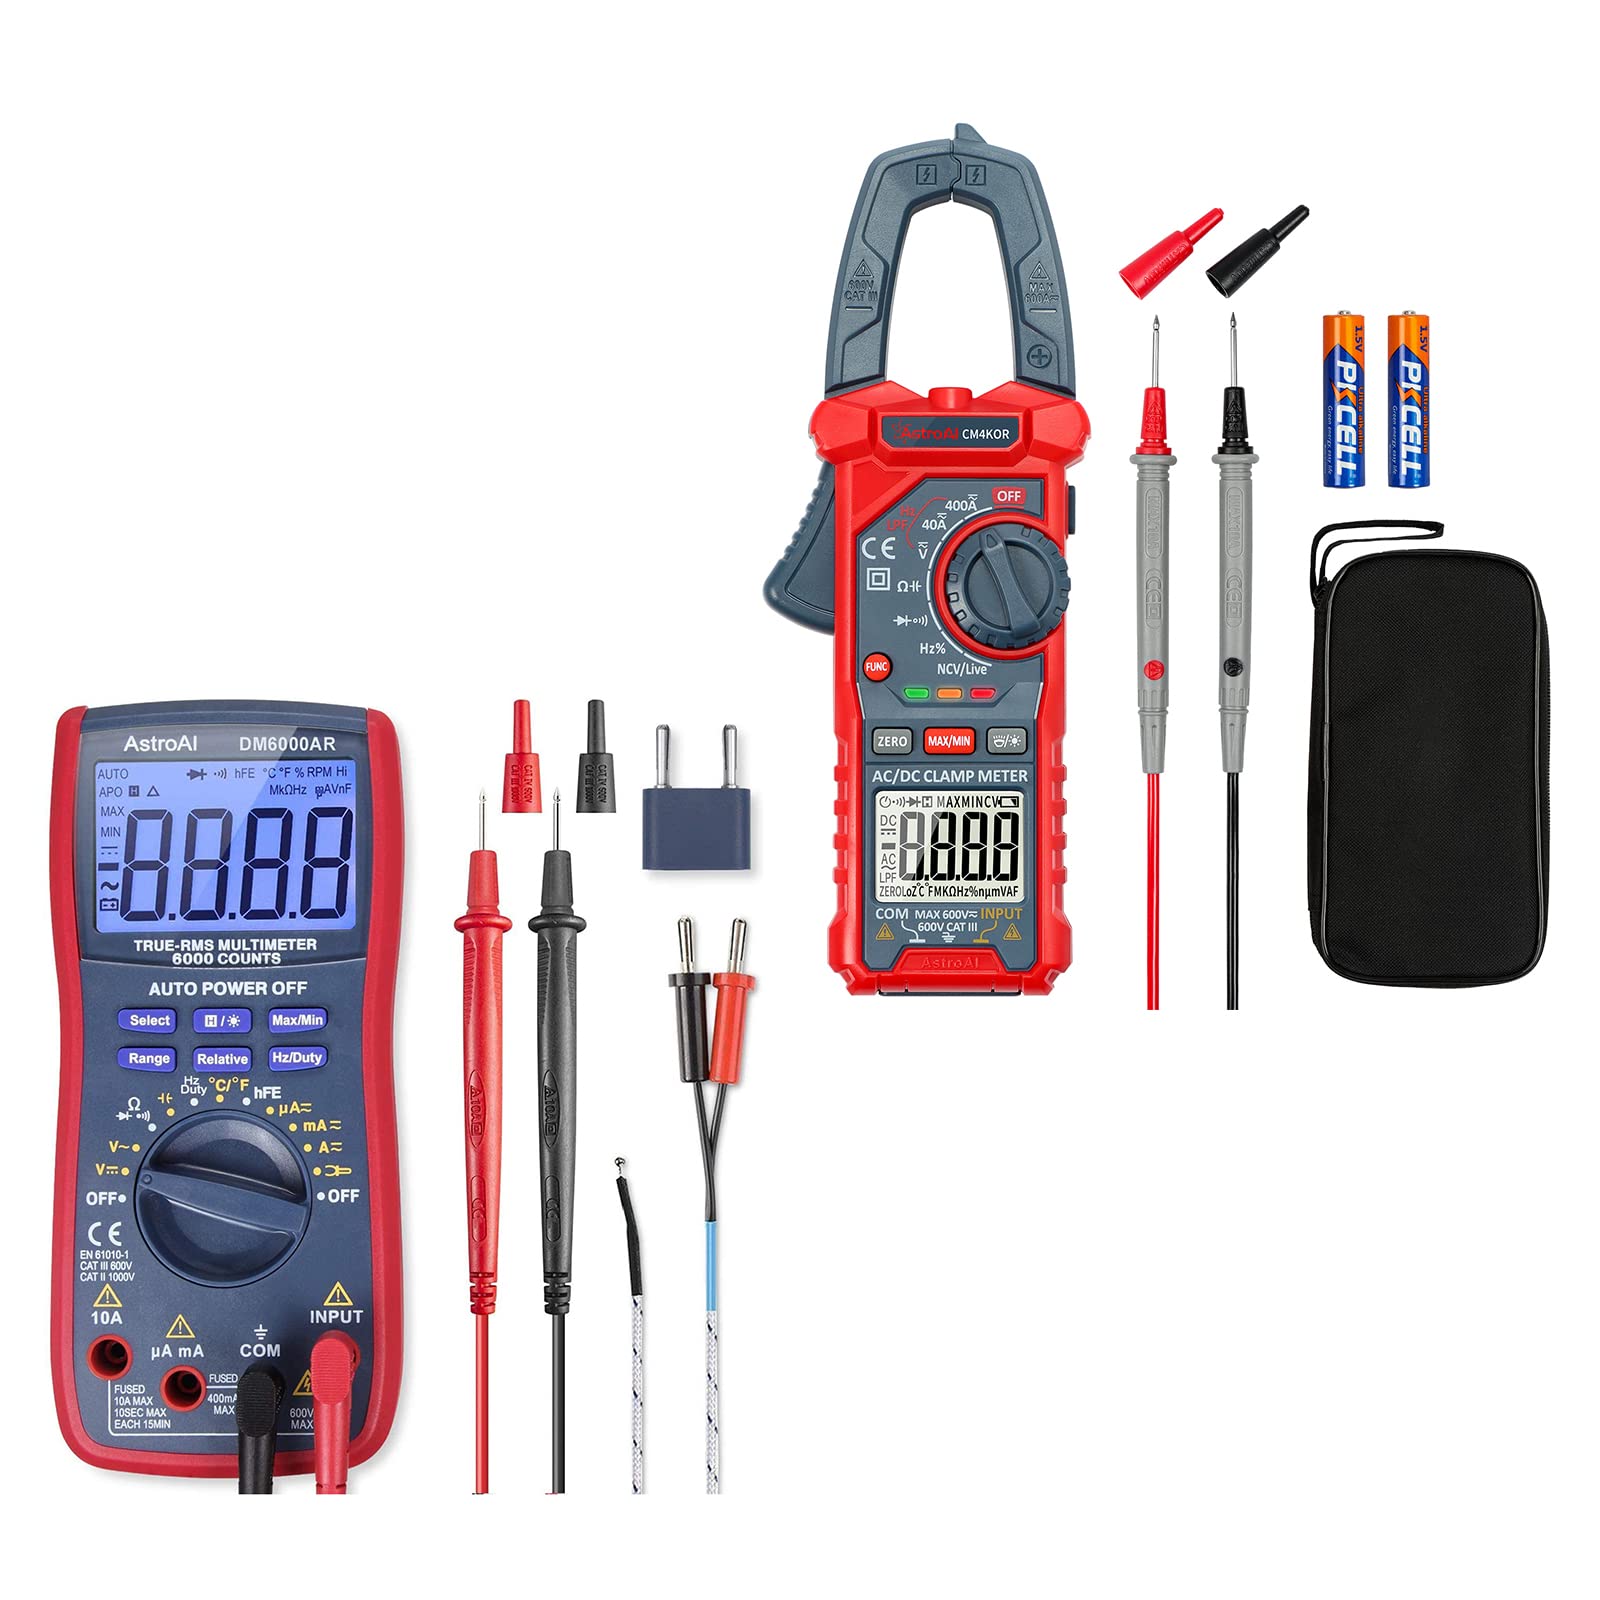 AstroAI TRMS 6000 Counts Multimeter with Large Backlit Display + 4000 Counts Auto-ranging Digital Clamp Meter